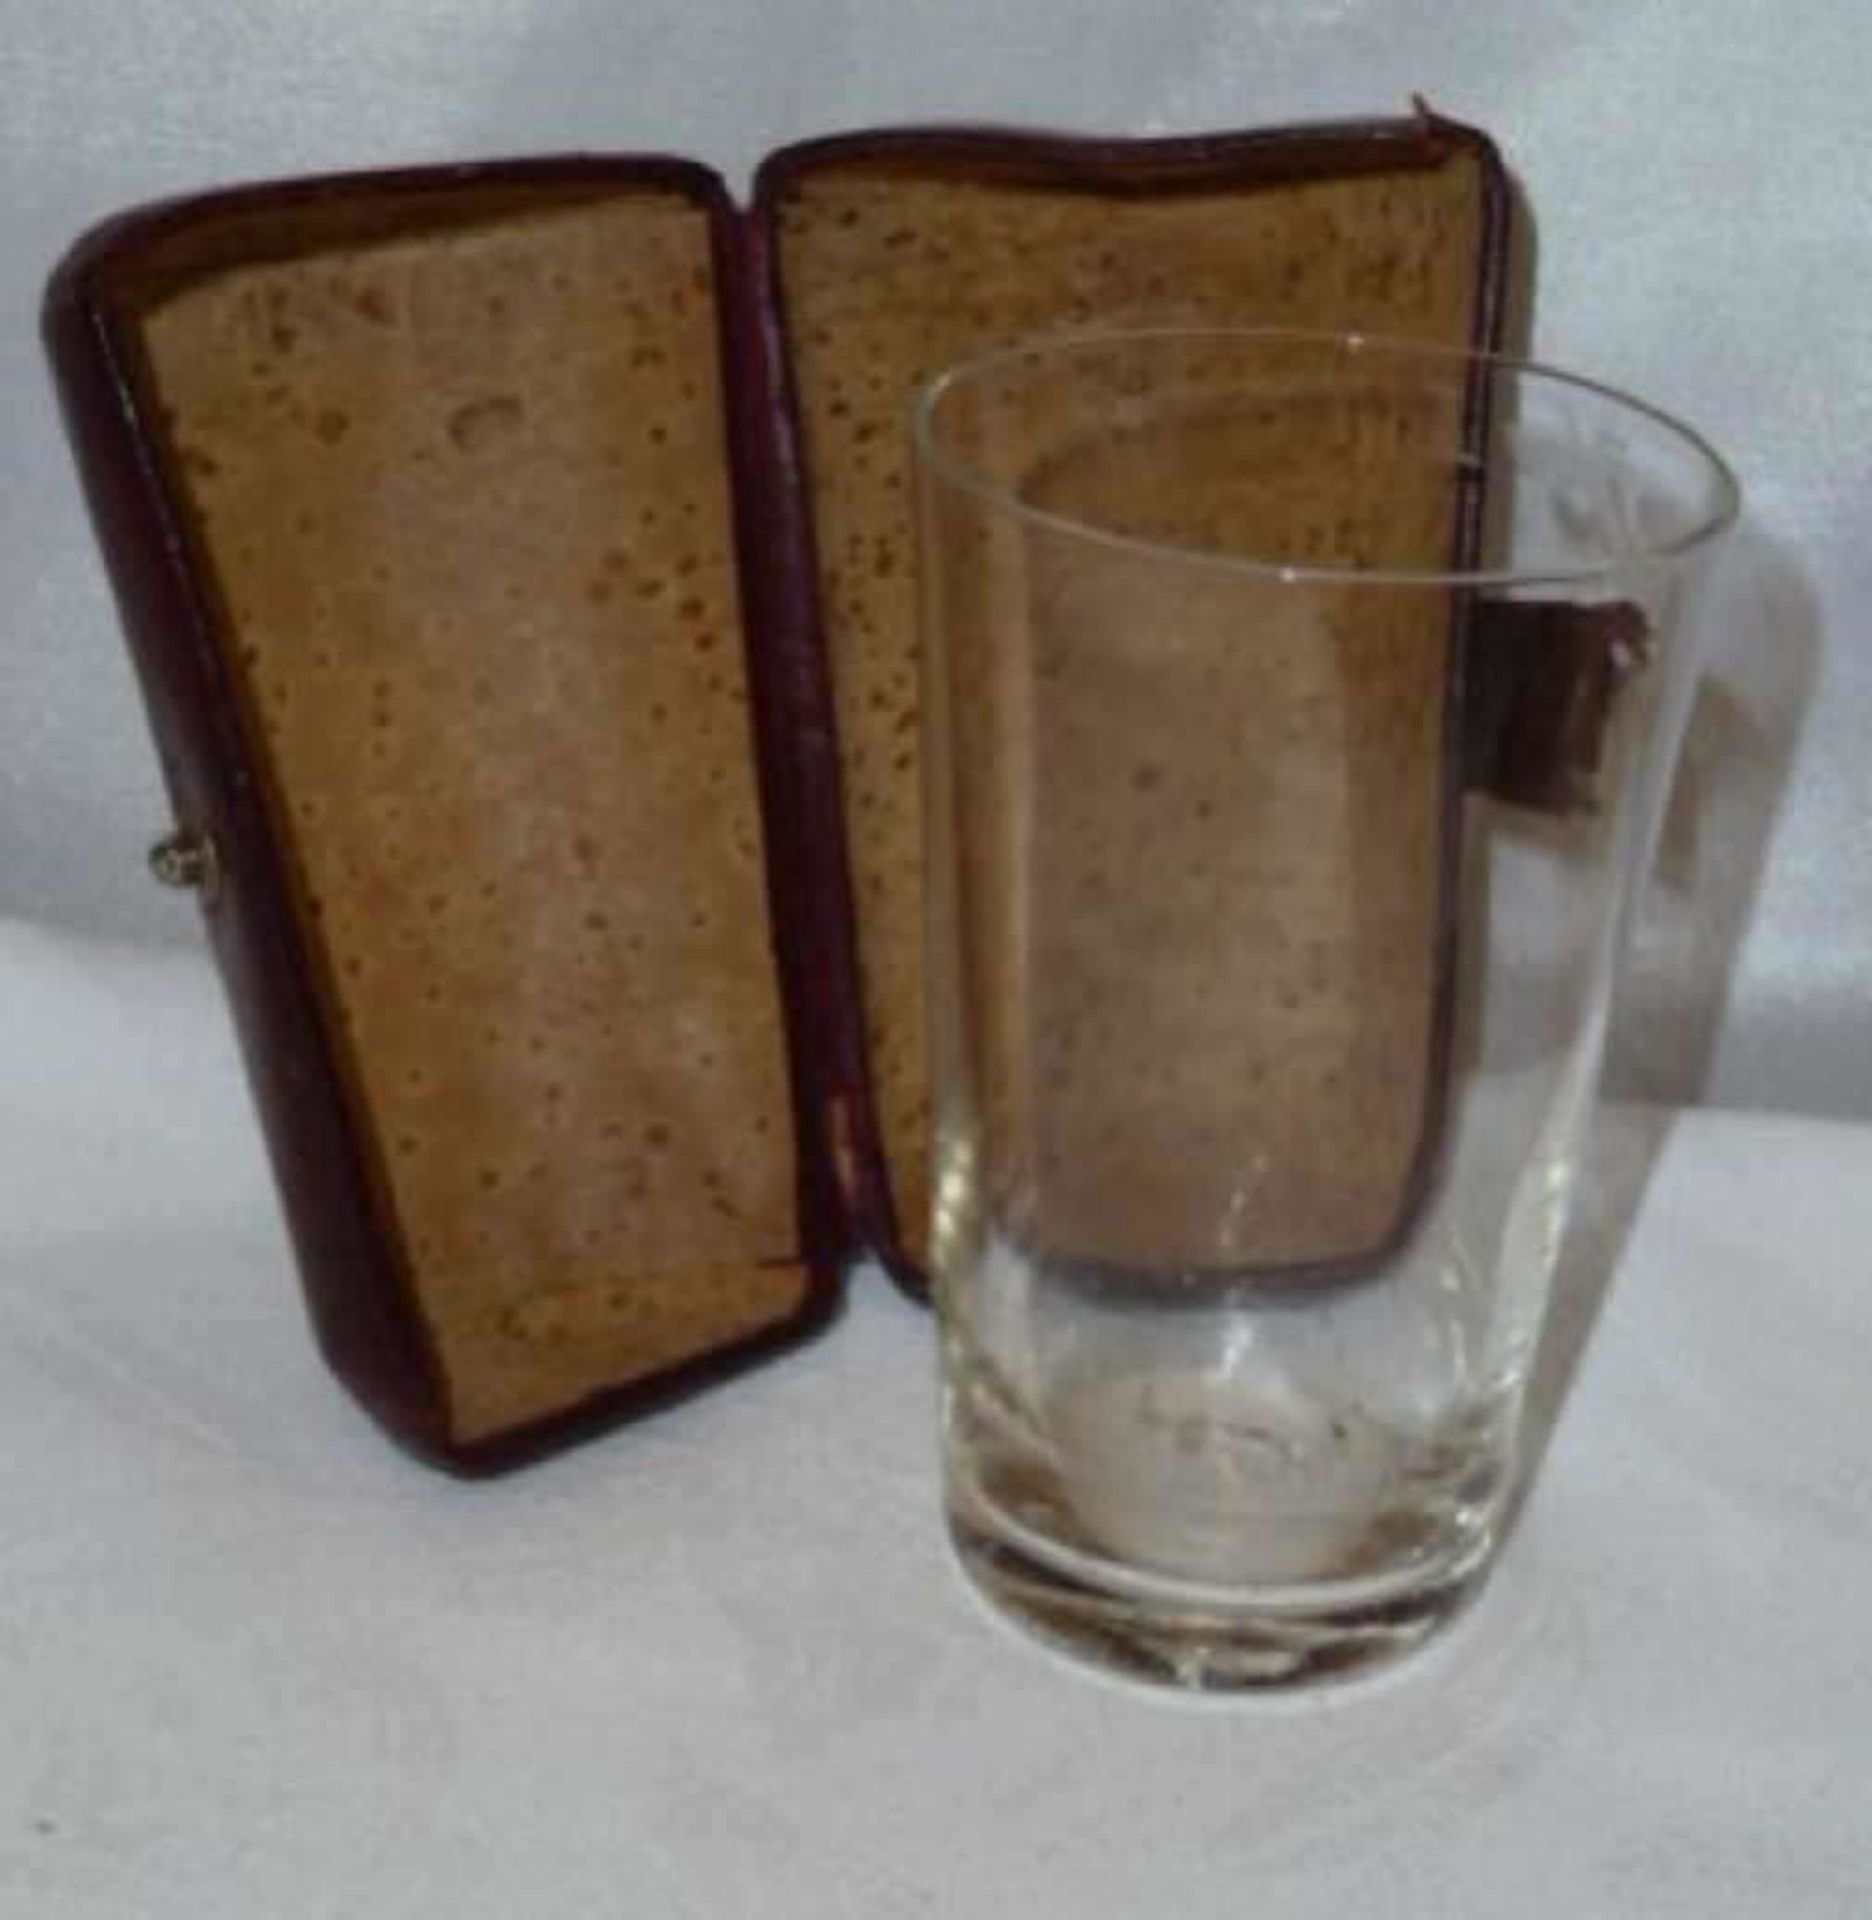 1 travel glass around 1900 in a leather case, height about 9cm. 10cm.